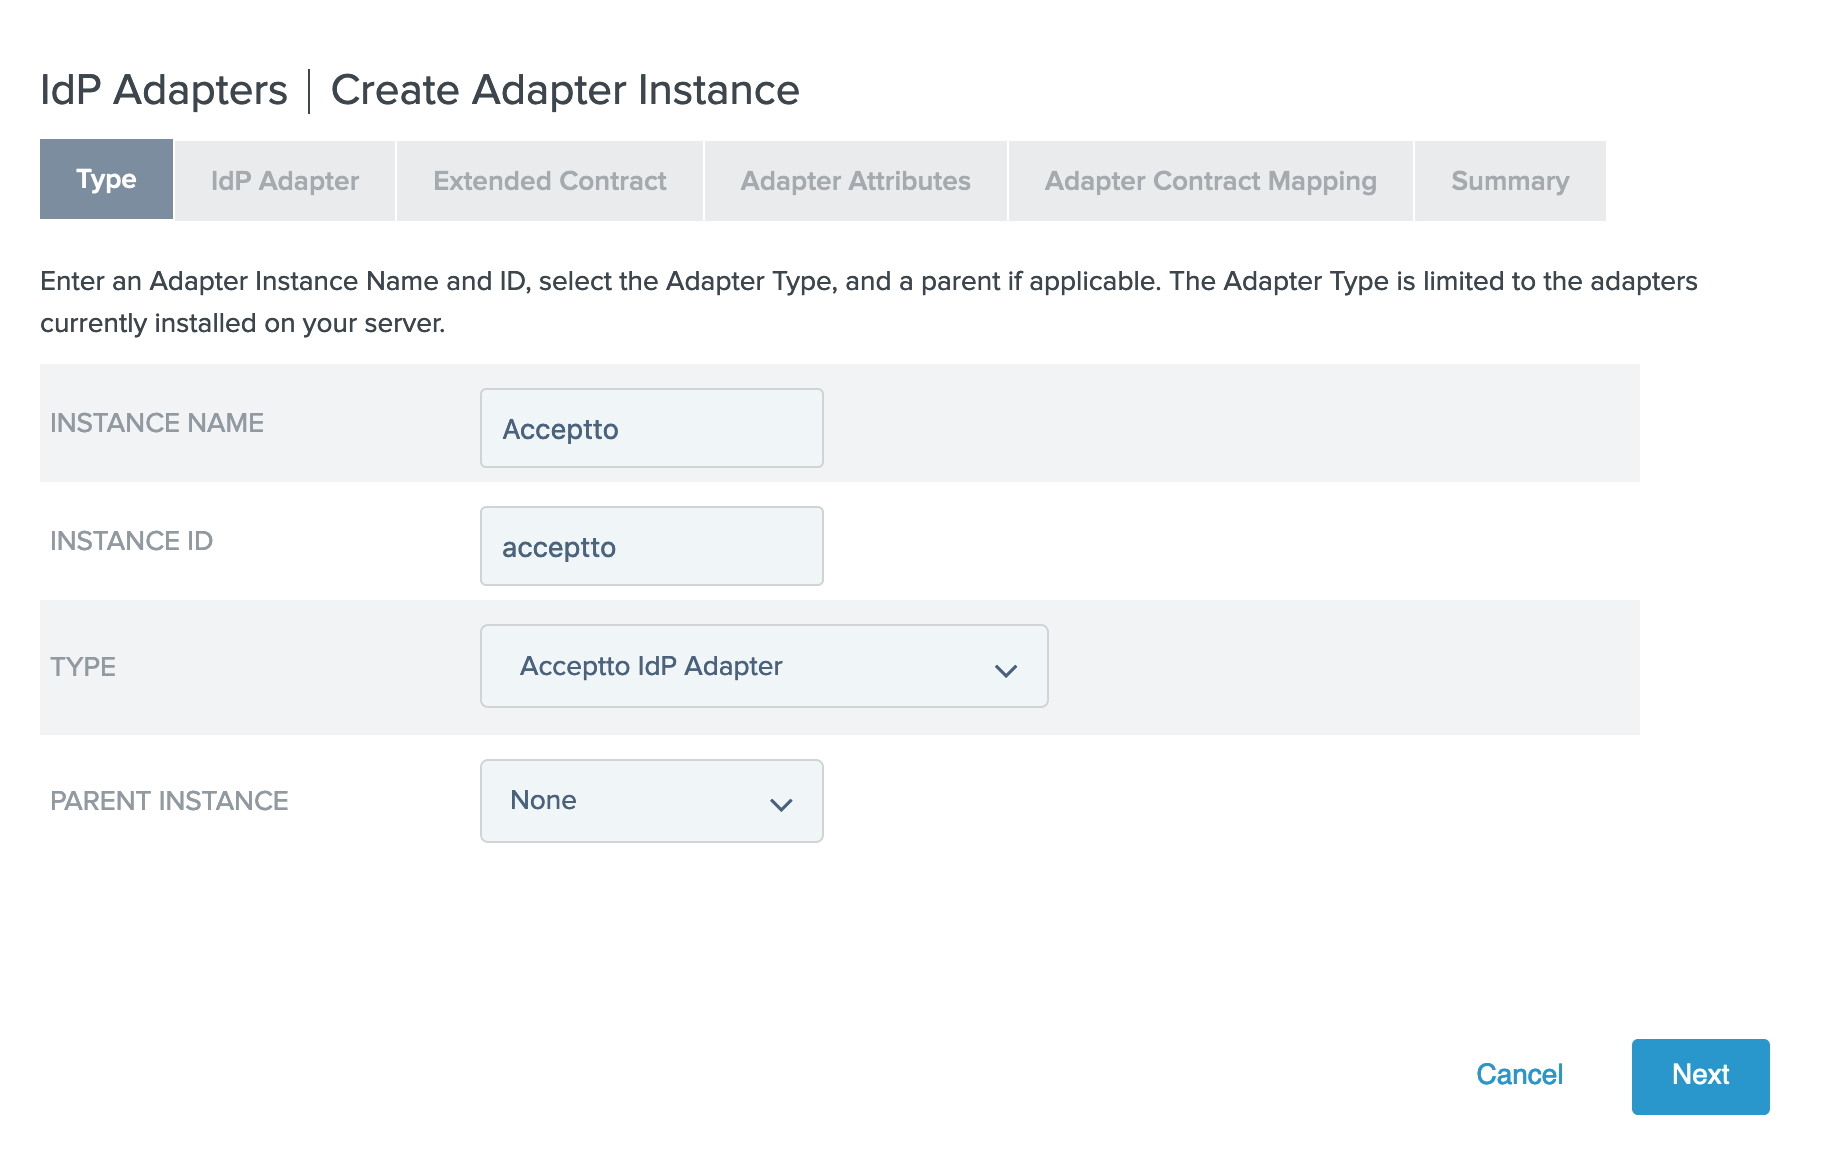 IdP Adapters | Create Adapter Instance - Type